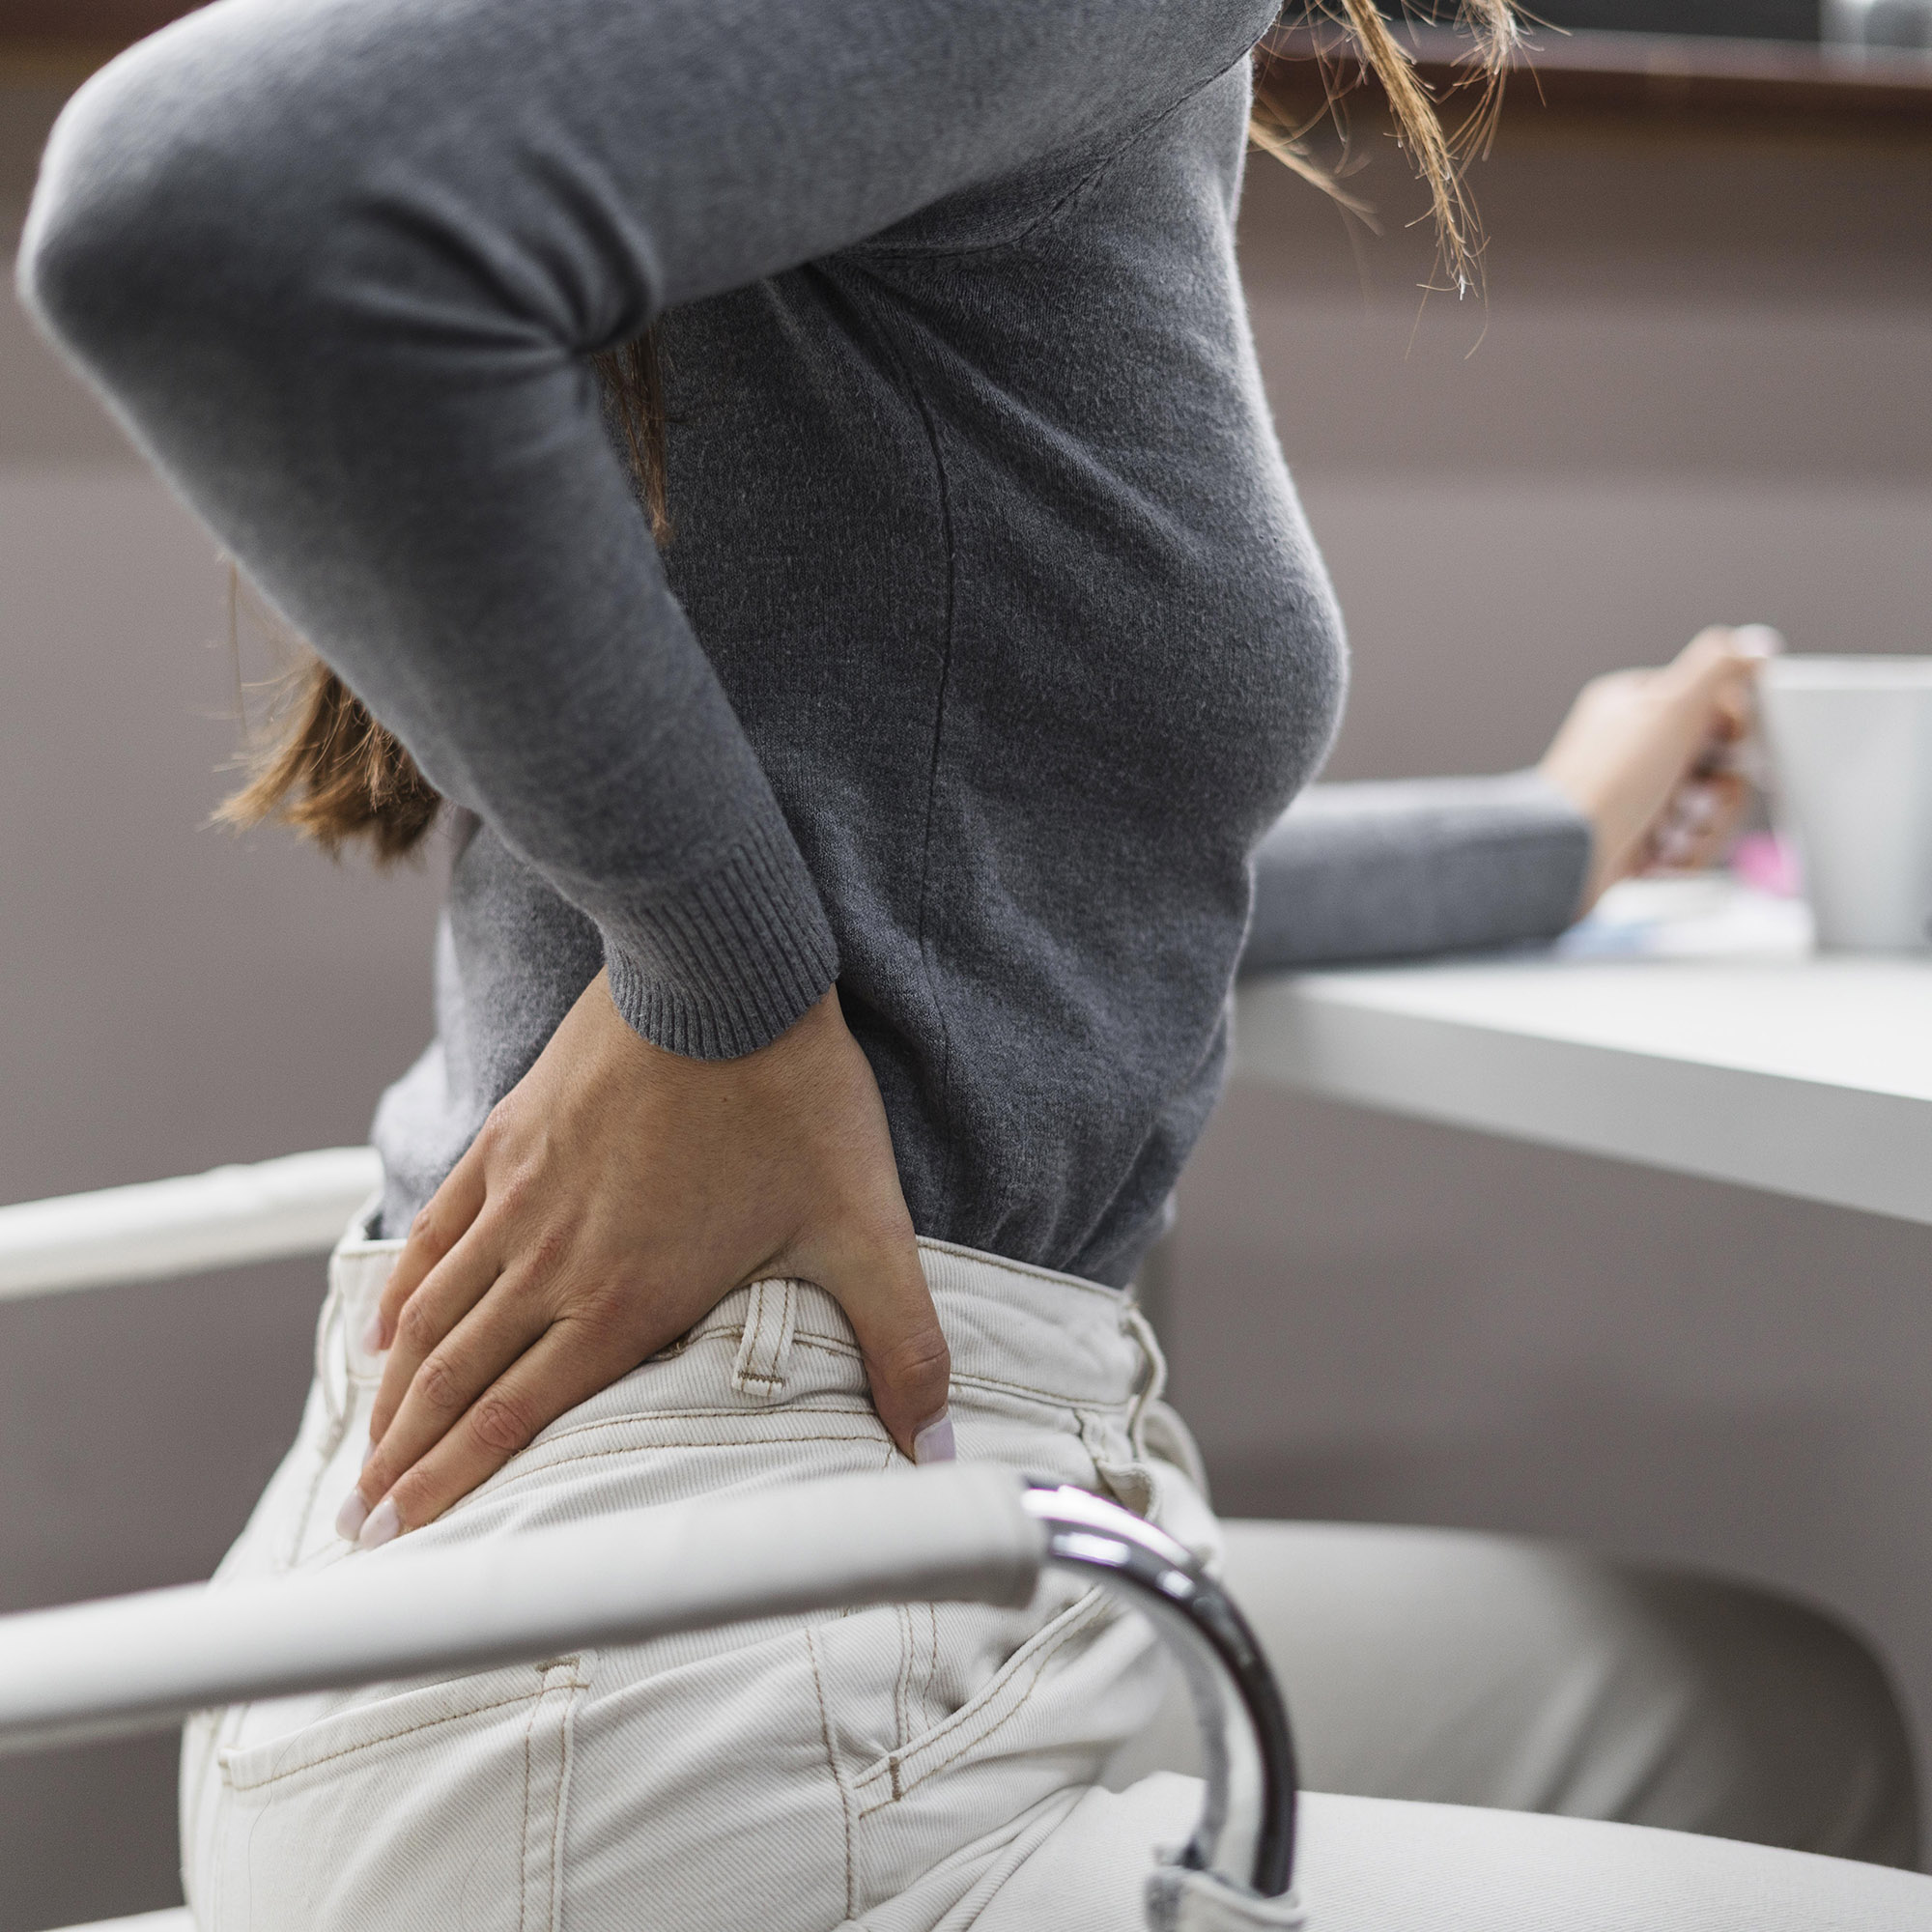 Symptoms and Causes of Hip Disorders